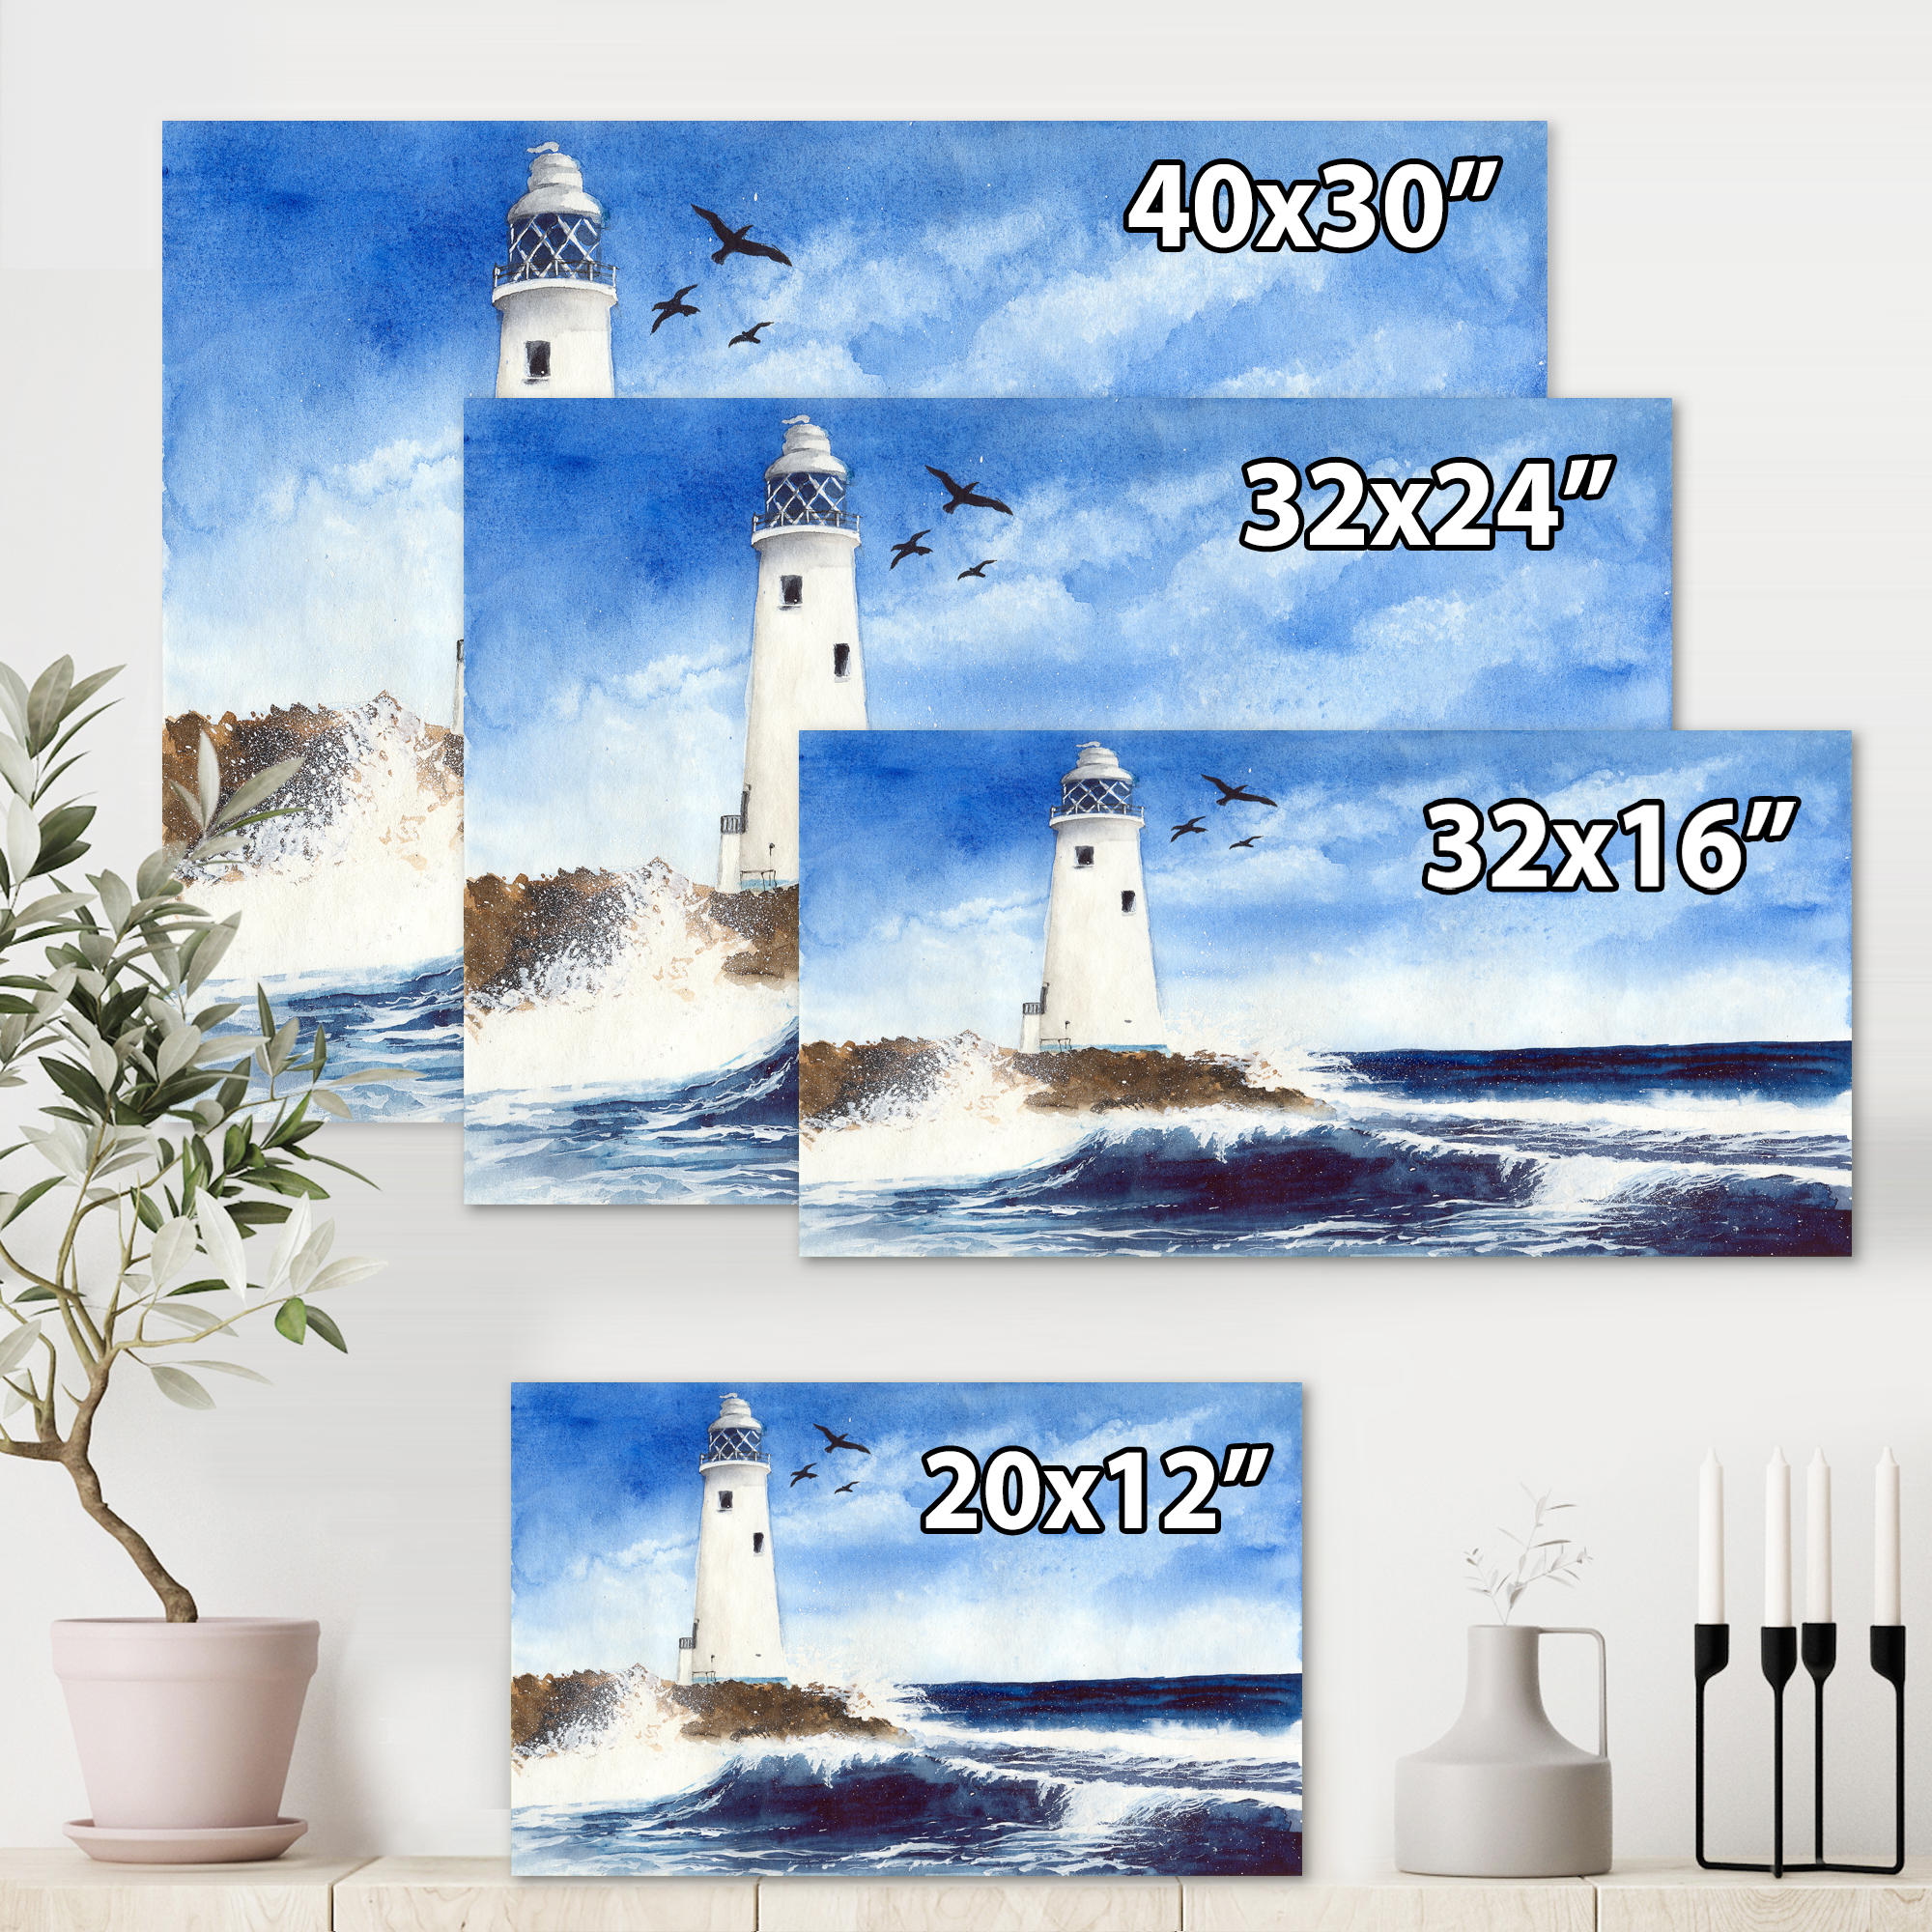 Seagulls With Lighthouse On The Rocky Island 40 in x 30 in Painting Canvas Art Print, by Designart - image 4 of 4